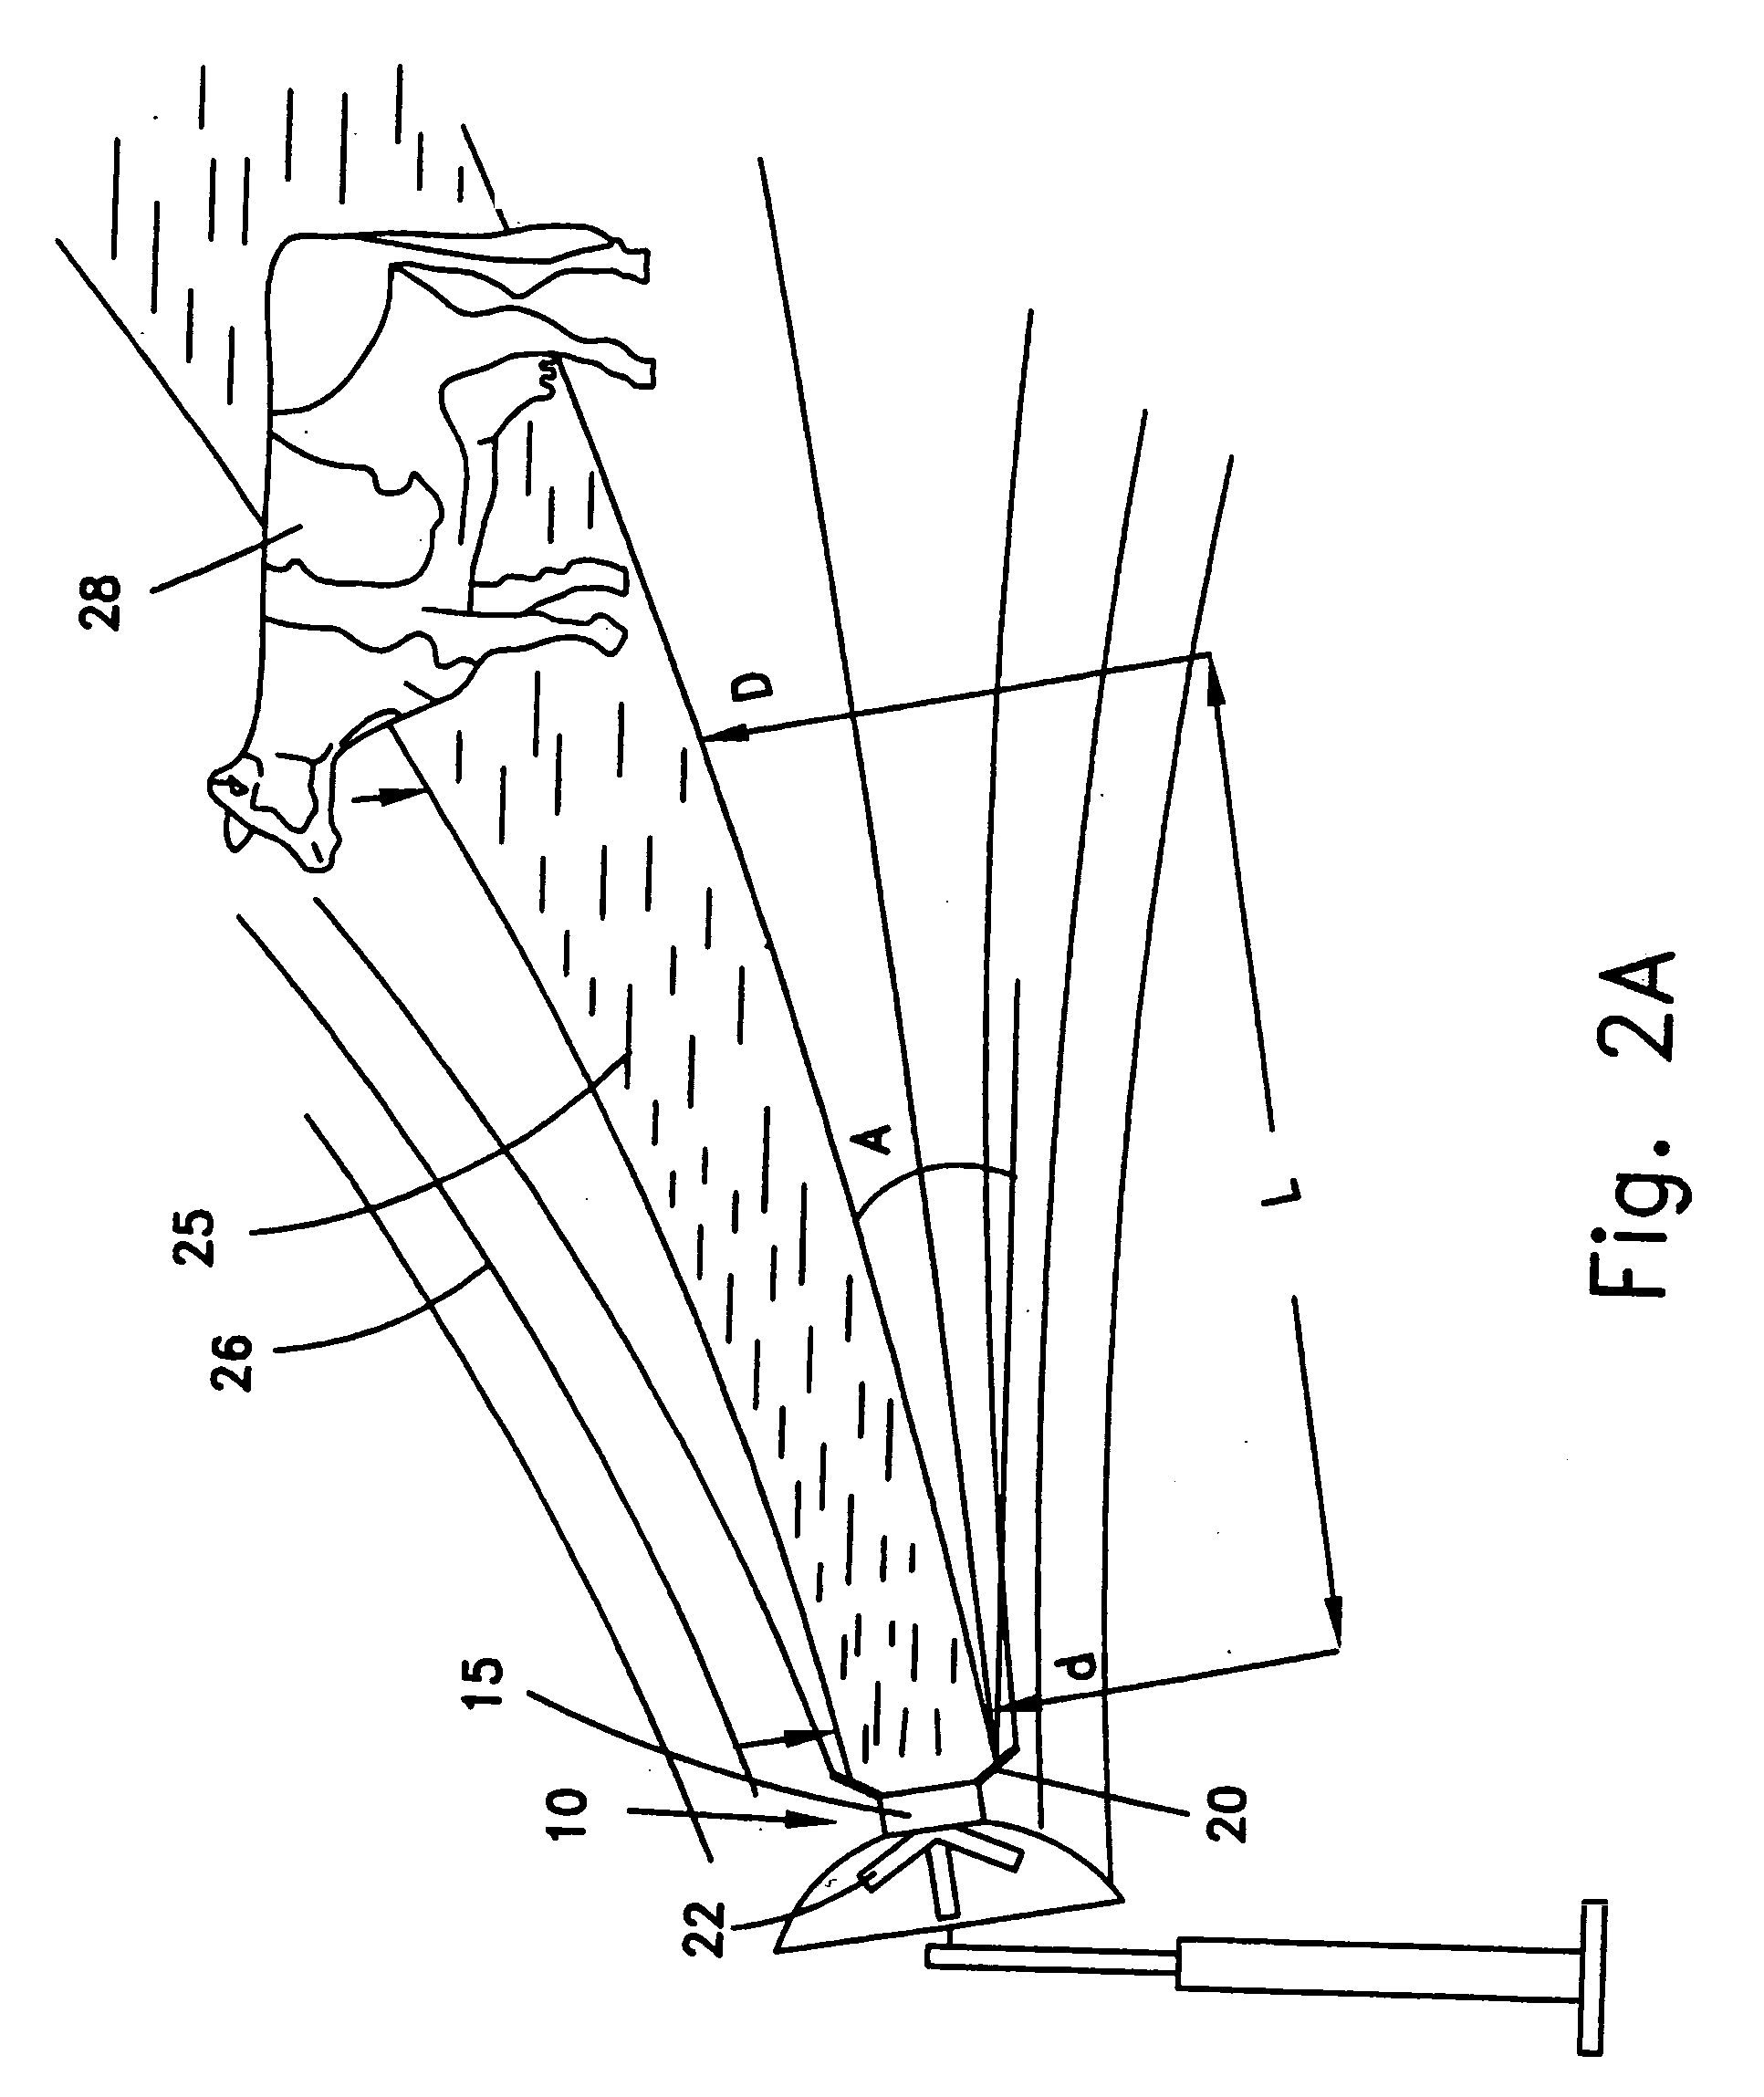 Spray device for cooling cattle in sheds and method of using the same